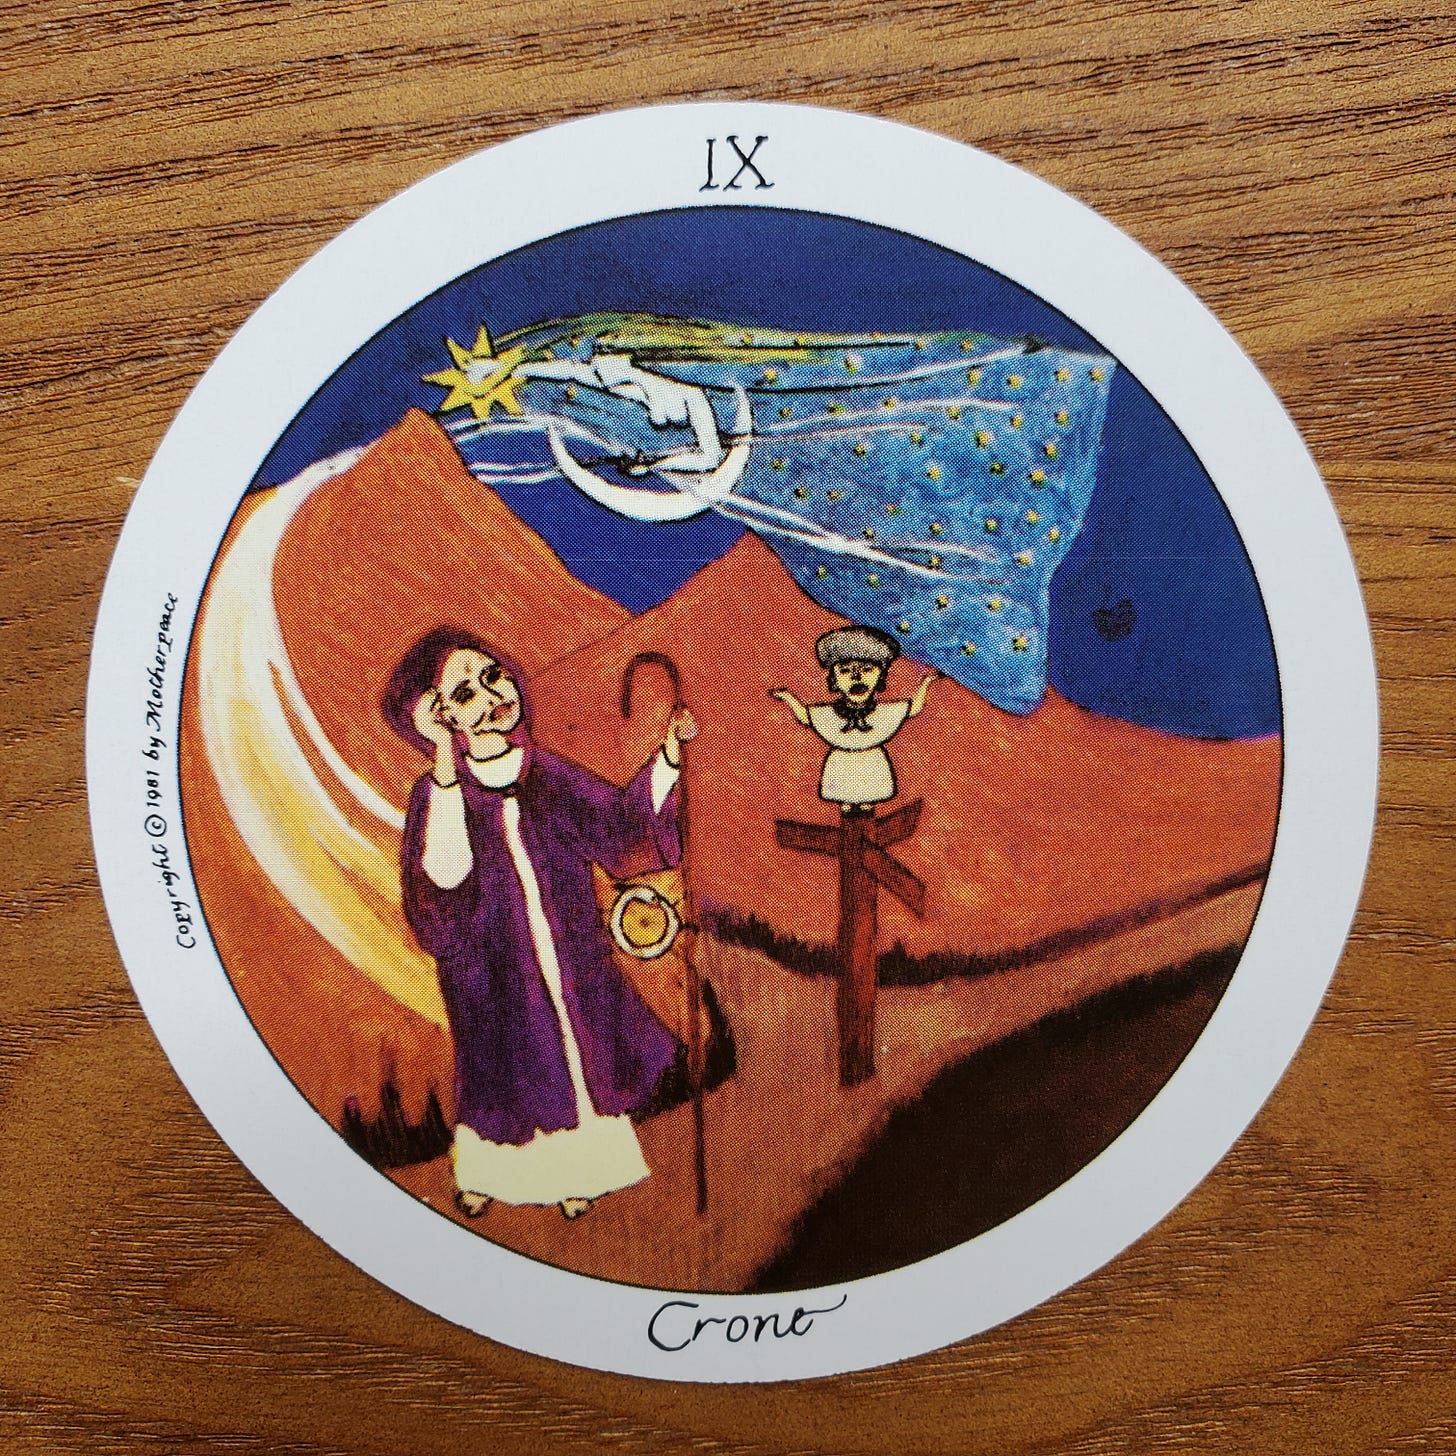 A round card with the roman numeral 9 and the word crone in the border around the card. Inside the border, an image of a older woman with a walkig staff an angle flying overhead, and another small female figure perched atop a crossroads sign.